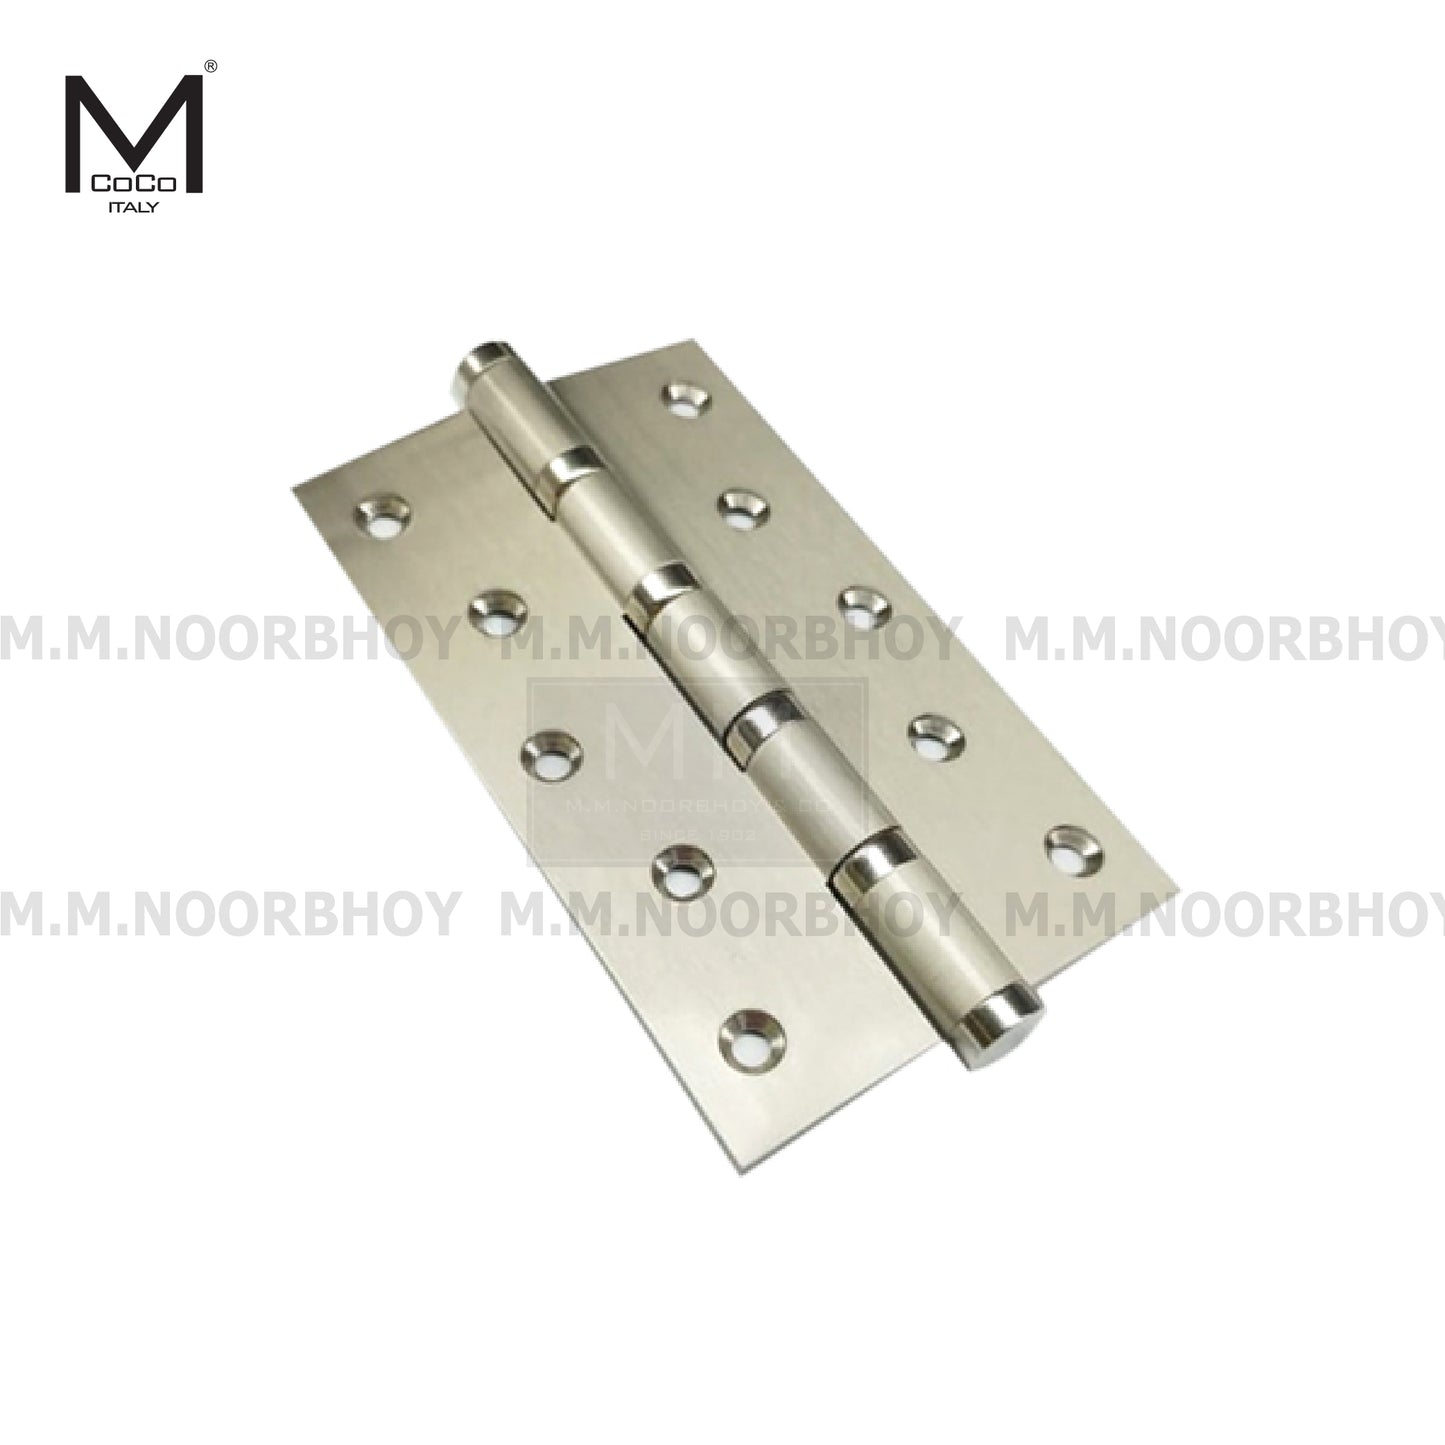 Mcoco Nurbi Door Hinges With Ball Bearing, Sizes 3x2 to 6x6 Inches, Stainless Steel & Antique Brass Finish - BBN